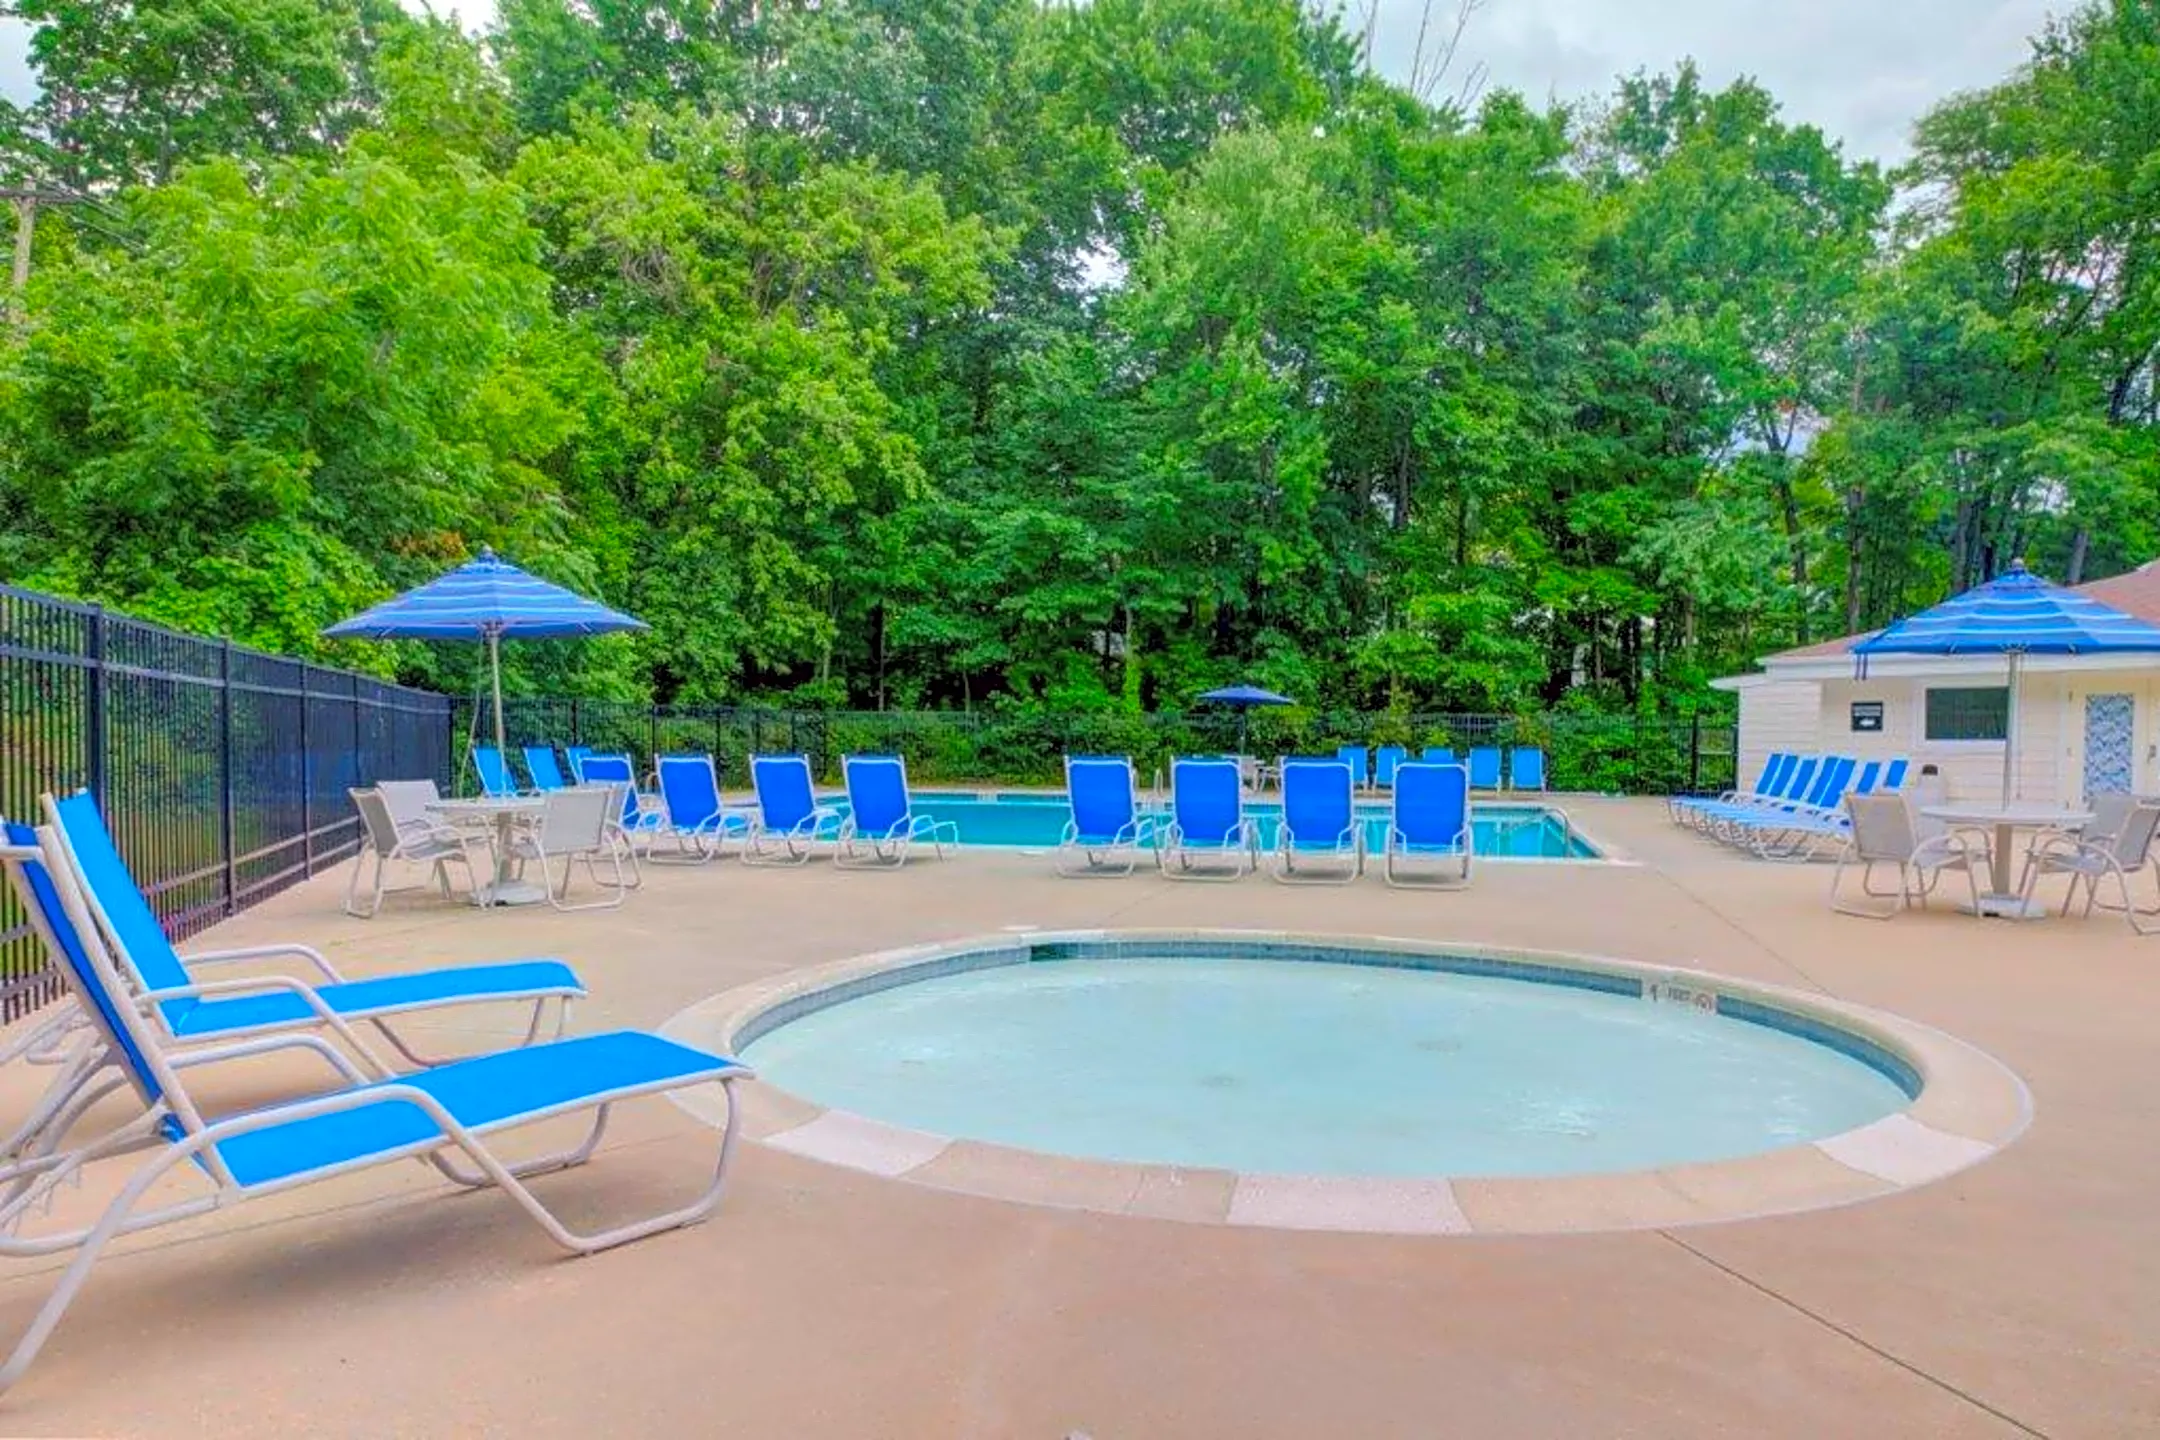 Pool - Willowbrook Apartments - Jeffersonville, PA